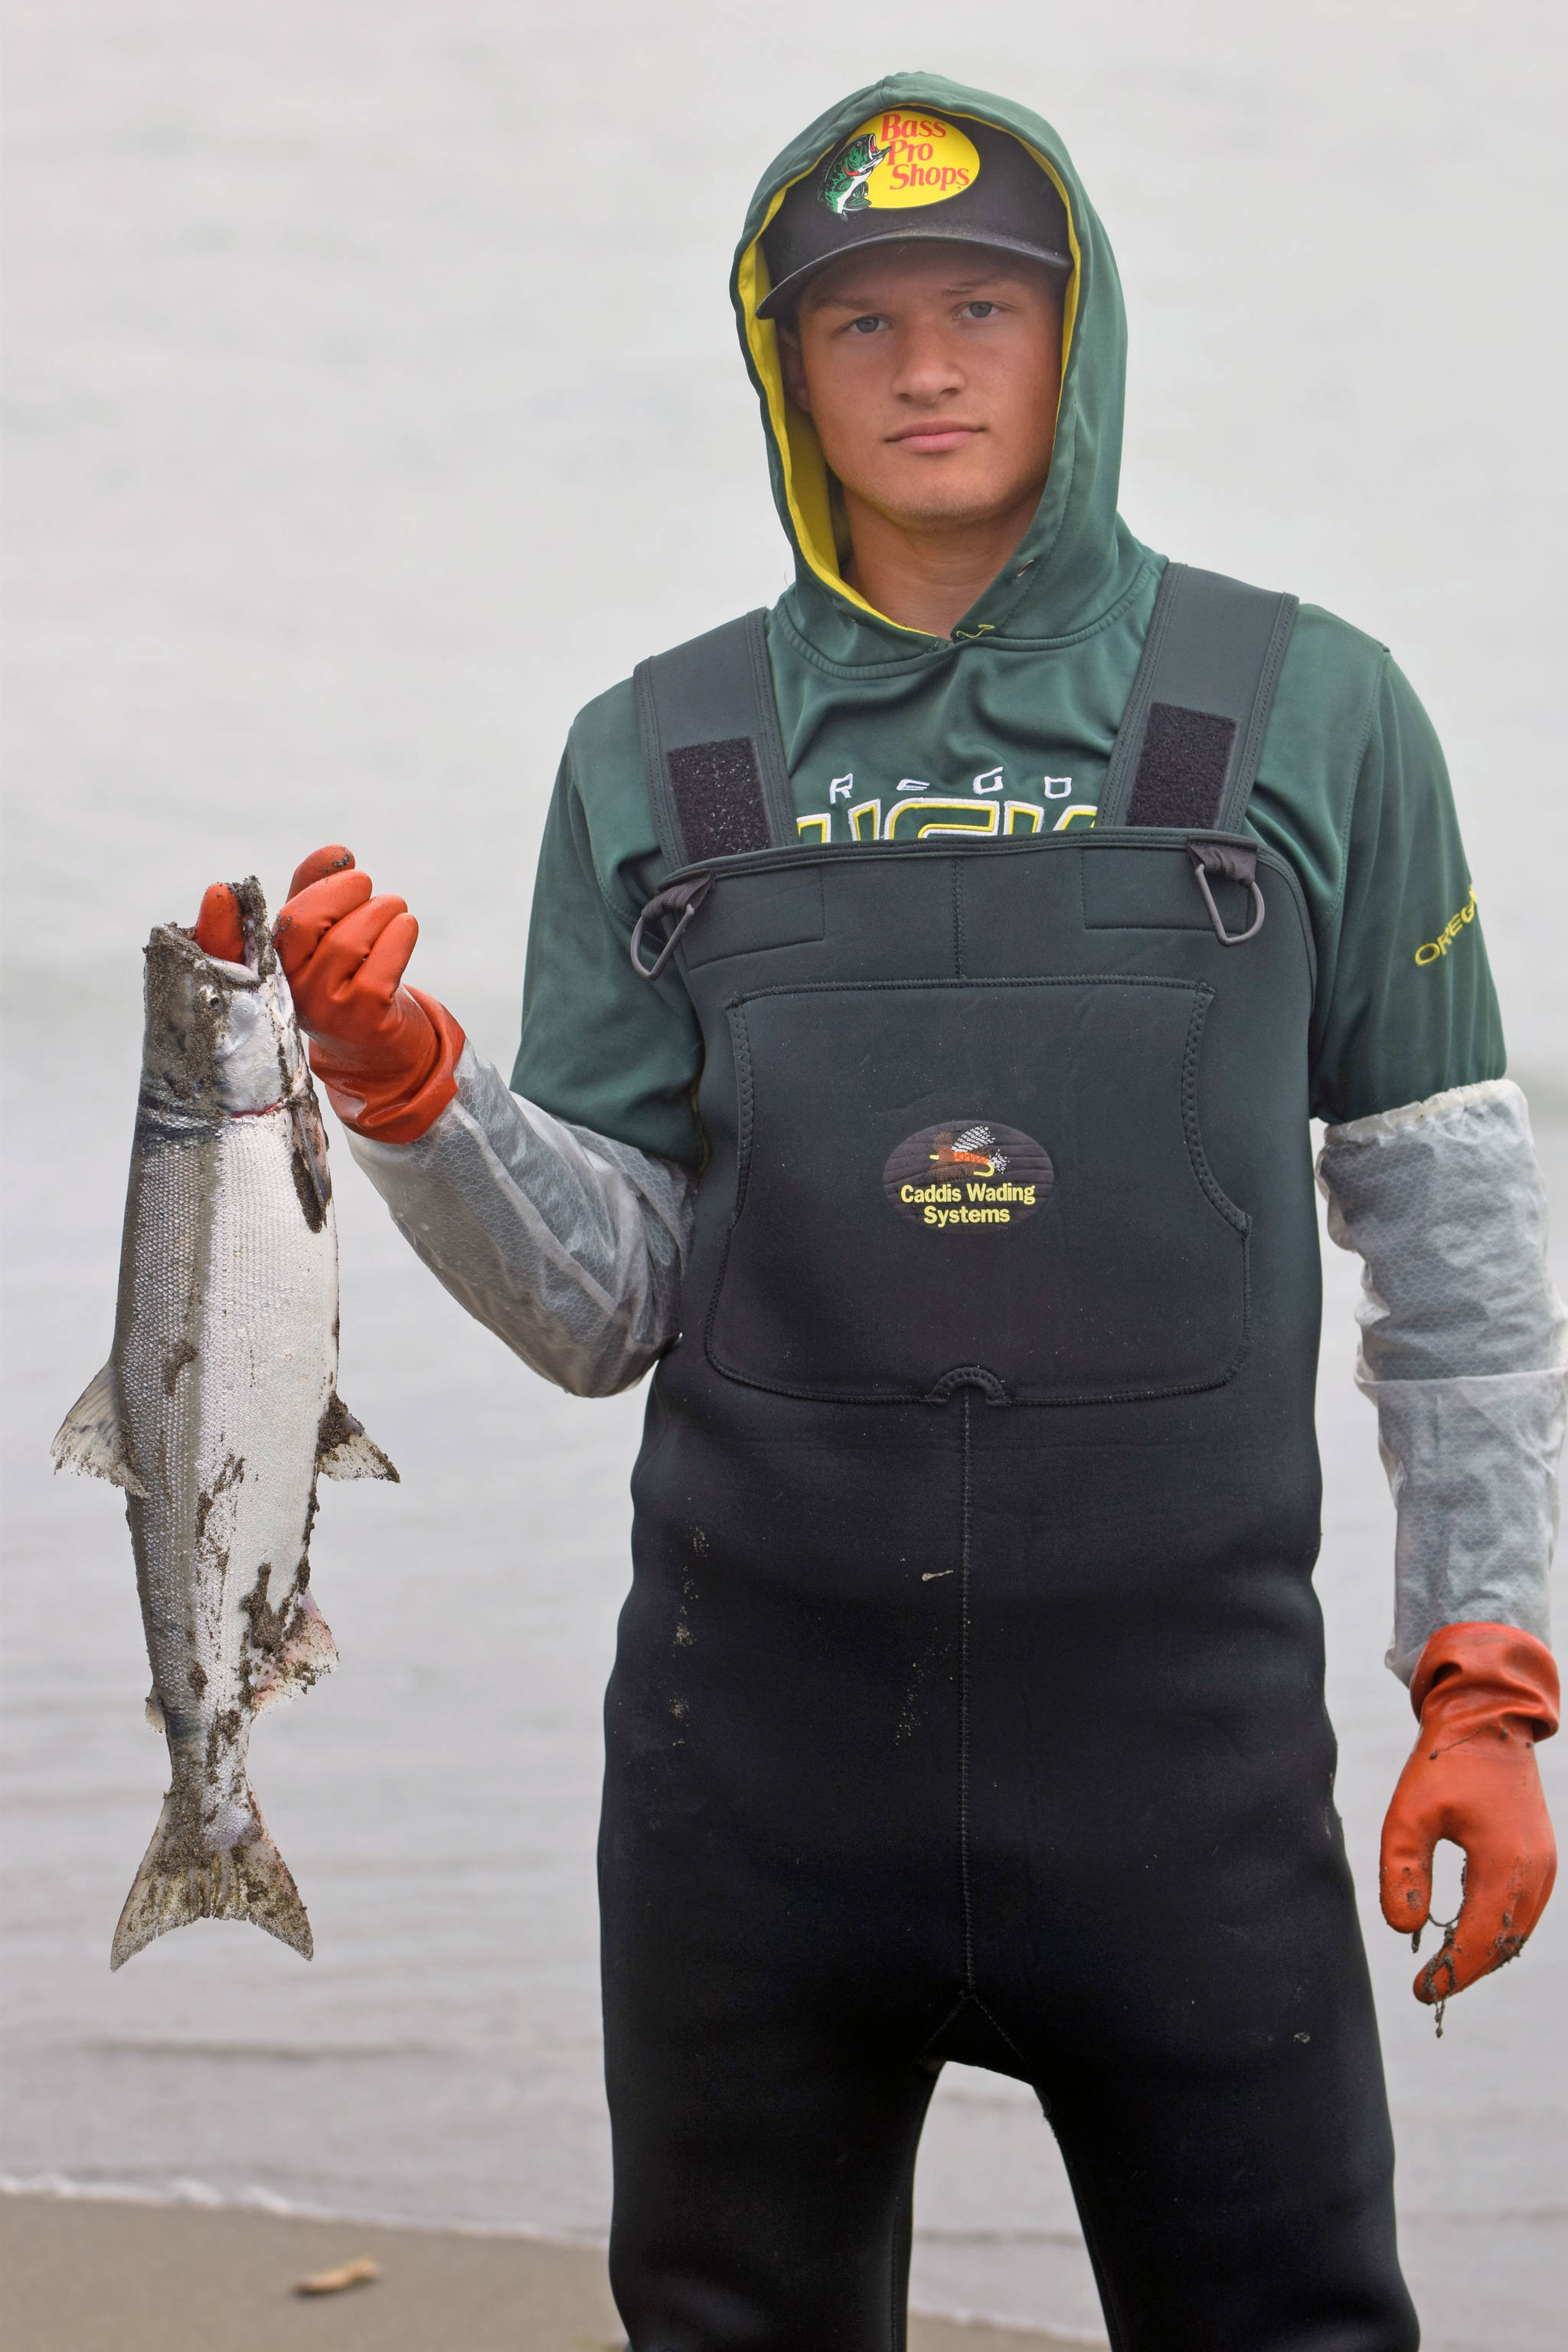 Anchorage resident Colton Herman displays a recently caught salmon on Kenai Beach during the opening day of dipnetting season on Tuesday, July 10, 2018, in Kenai, Alaska. Herman has come to Kenai to participate in dipnetting every year since he was a child. Herman said the catch had been slow so far, but would continue fishing until he got his quota. (Photo by Erin Thompson/Peninsula Clarion)